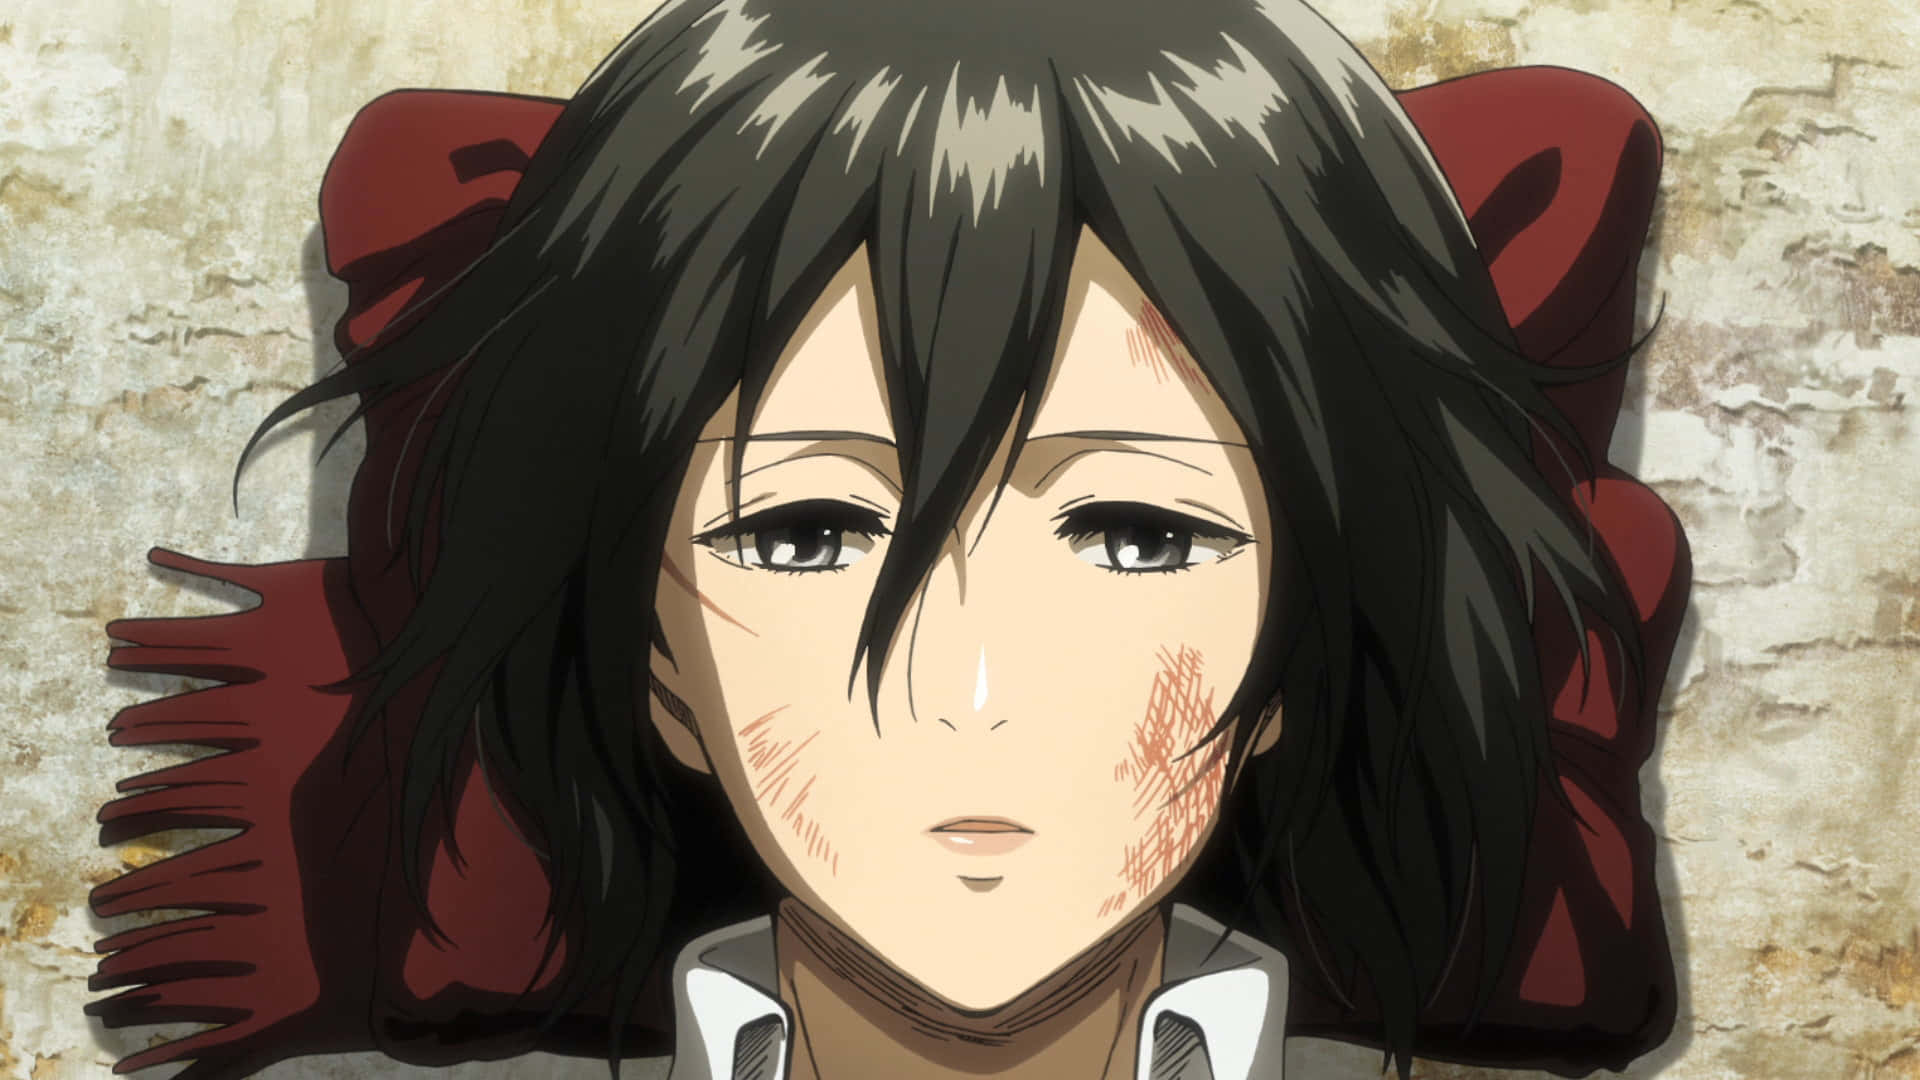 A Close-up of Main Character Eren Jaeger from Attack on Titan Season 2 Wallpaper